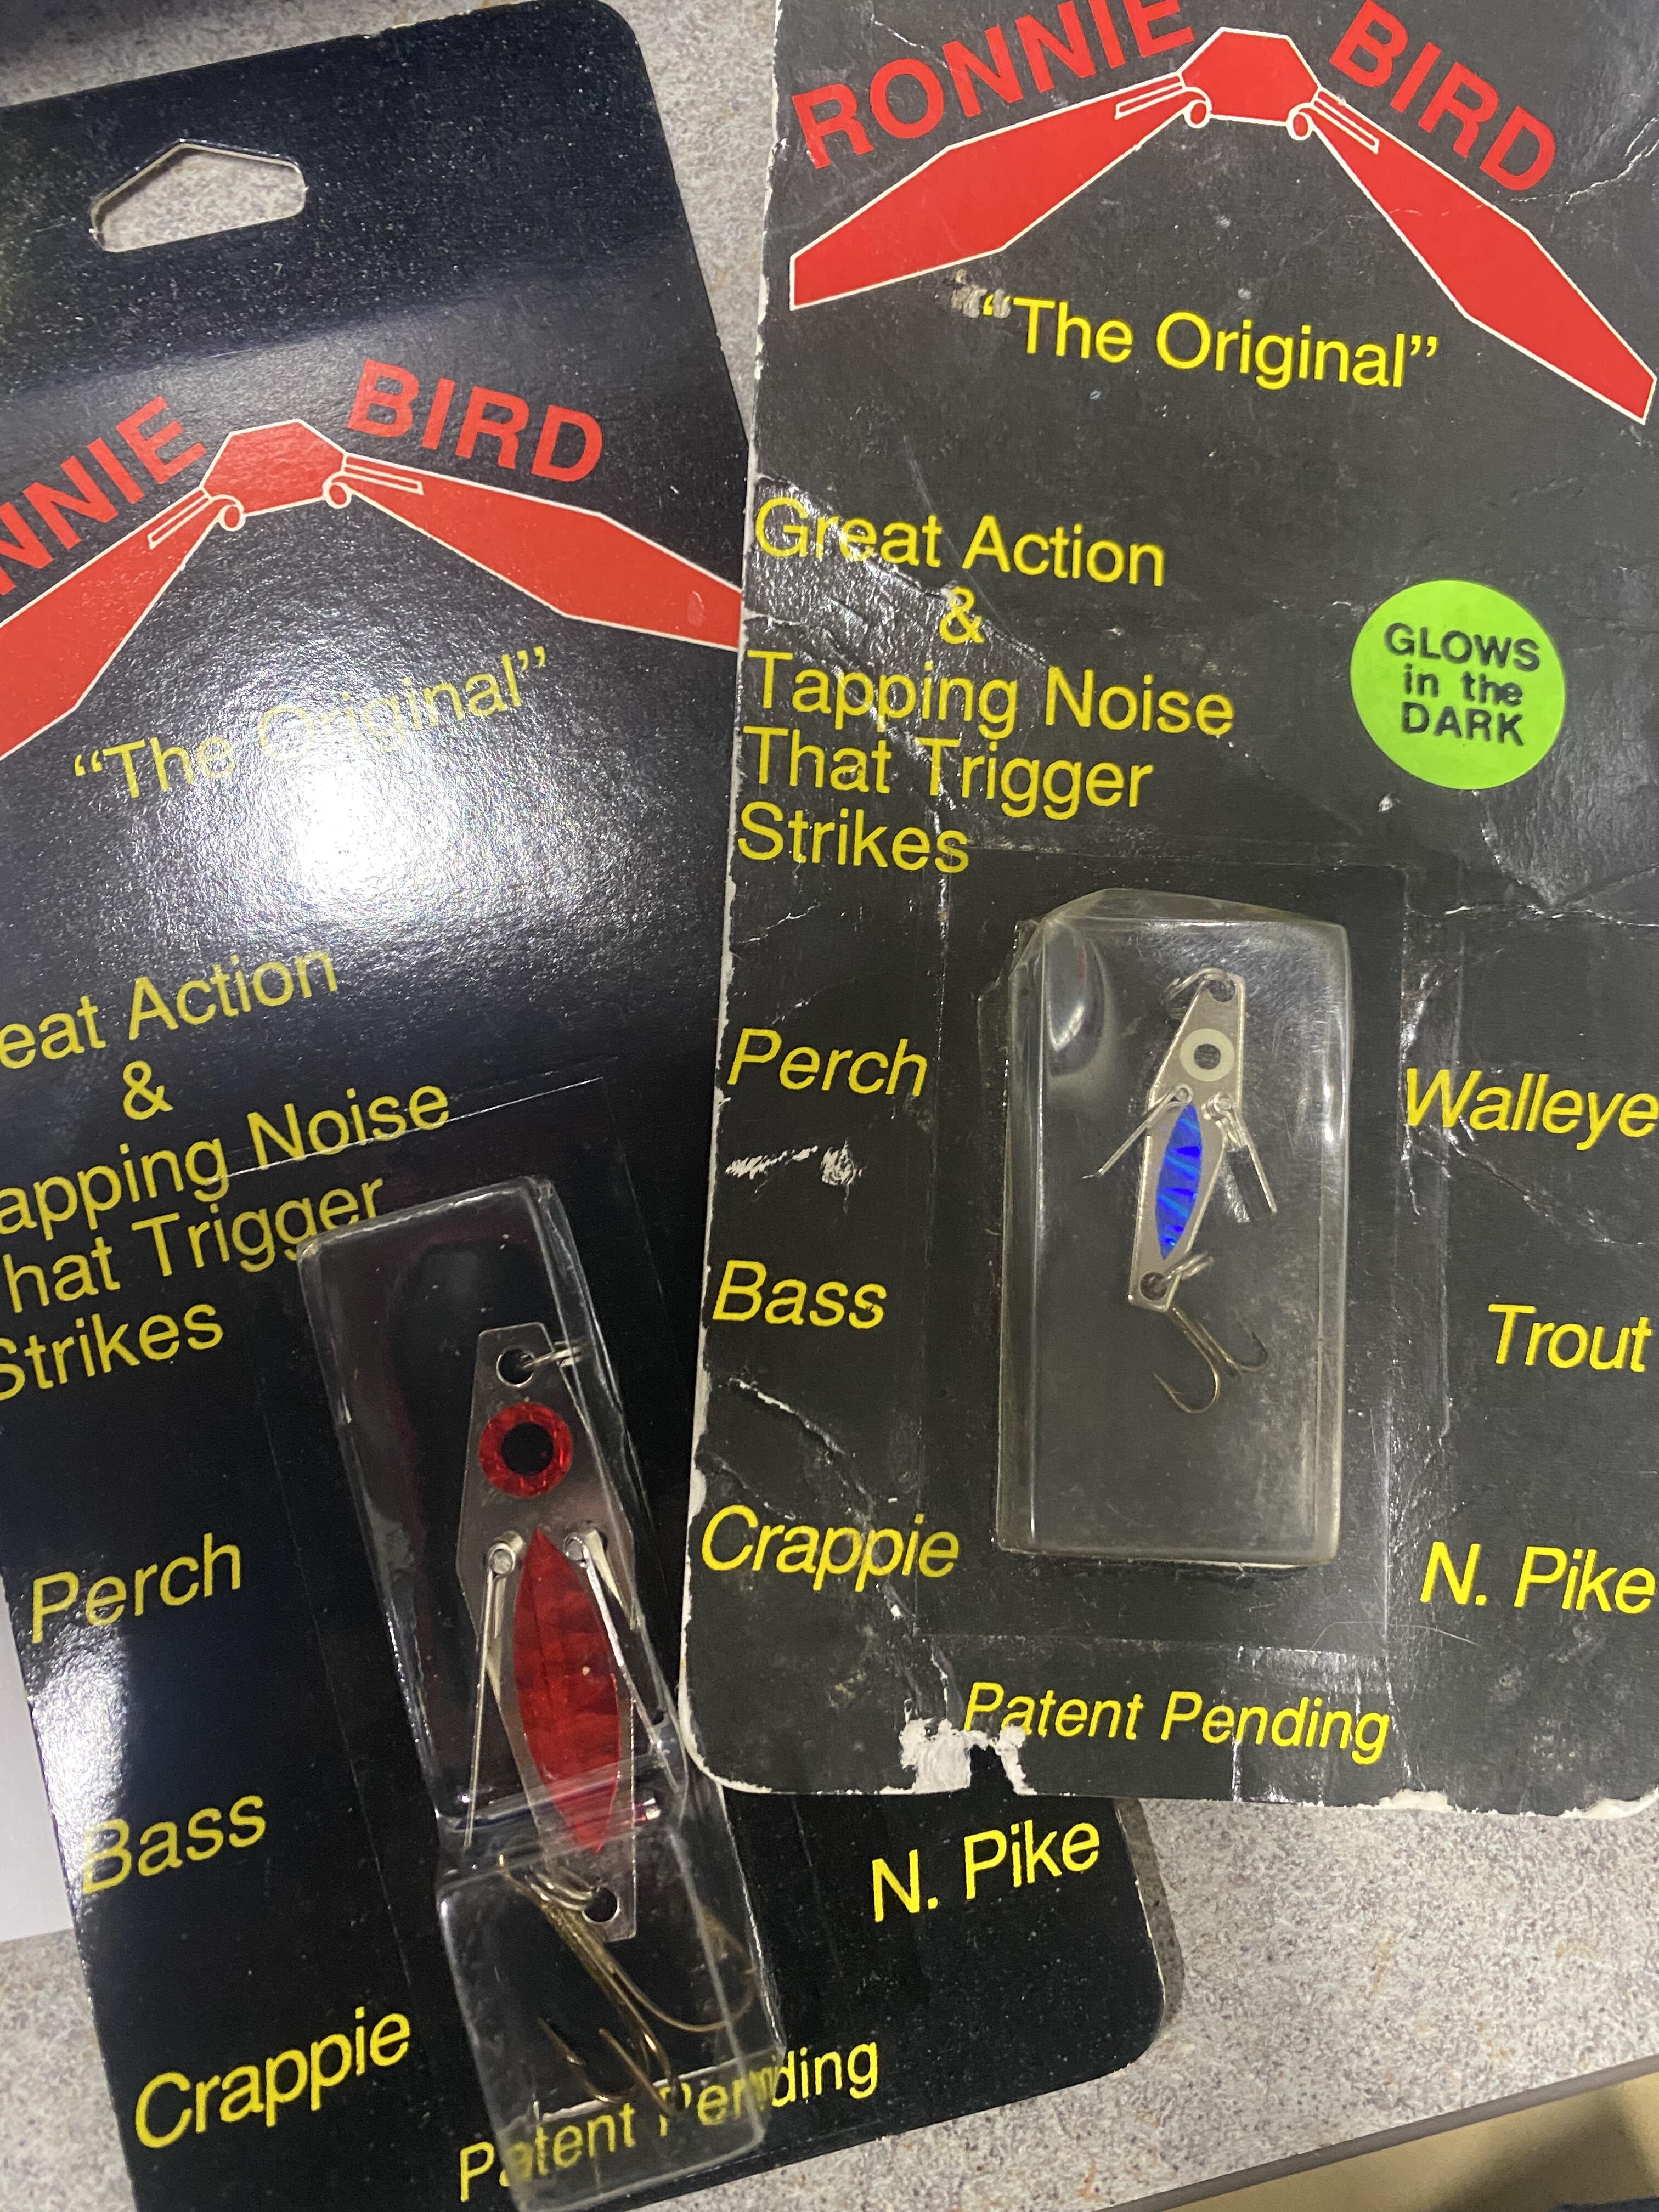 Ronnie Bird lure is back ! - Ice Fishing - Outdoor Re-Creation HotSpot  Communities